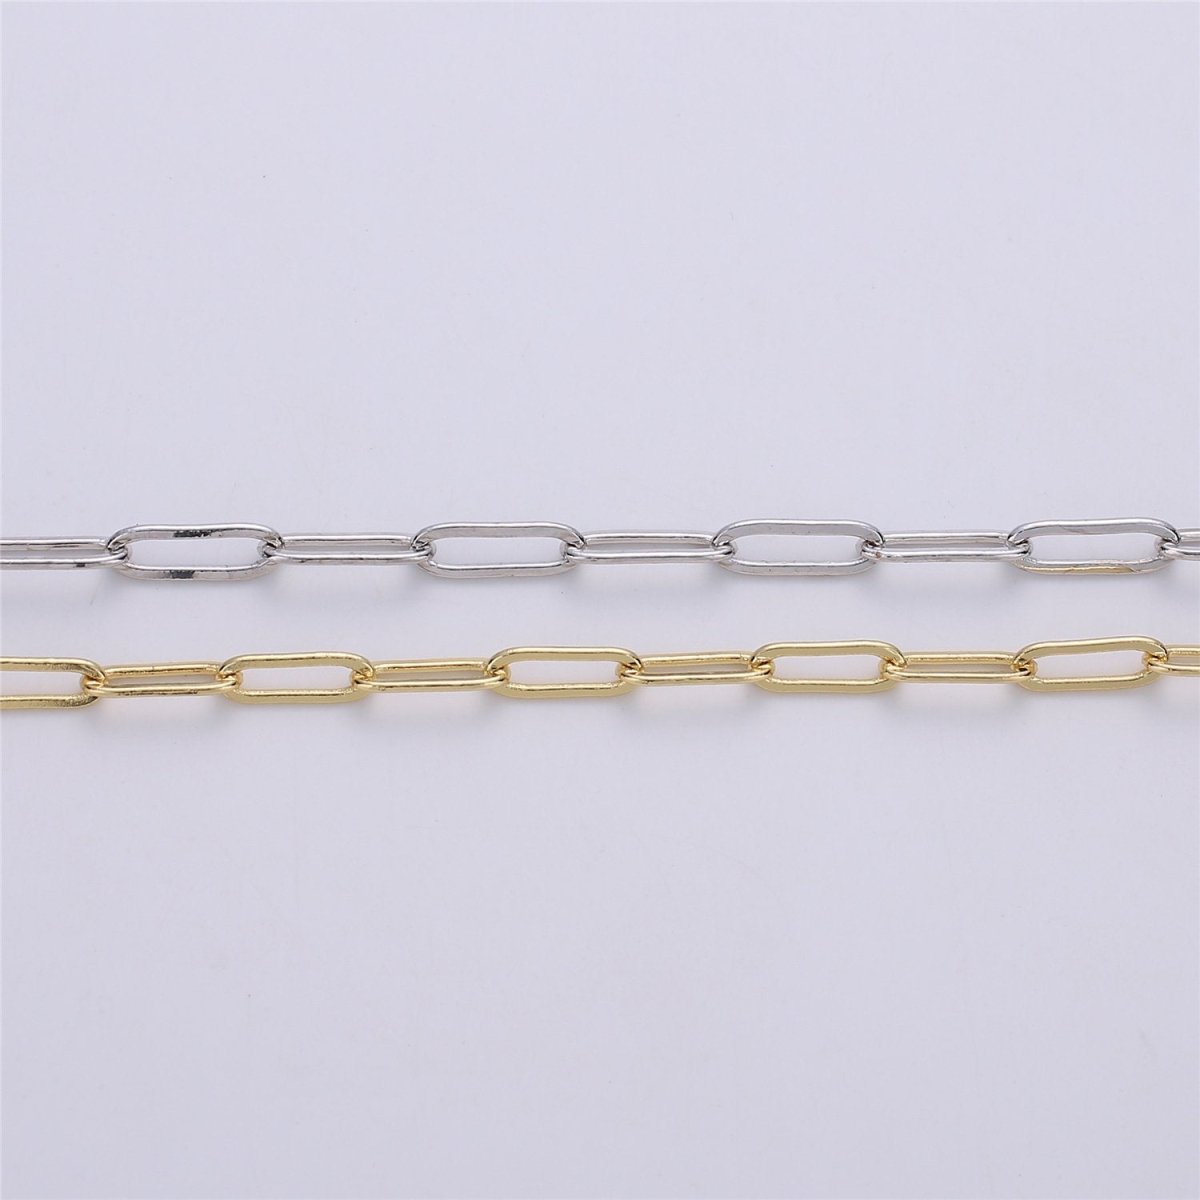 4X11mm 24K Gold Filled PAPERCLIP Elongated Chain, Flat Drawn Rectangle Cable Box Chain Sold By Yard, Bulk Unfinished Chain, White Gold Filled | ROLL-072, ROLL-077, ROLL-179, ROLL-095 Clearance Pricing - DLUXCA